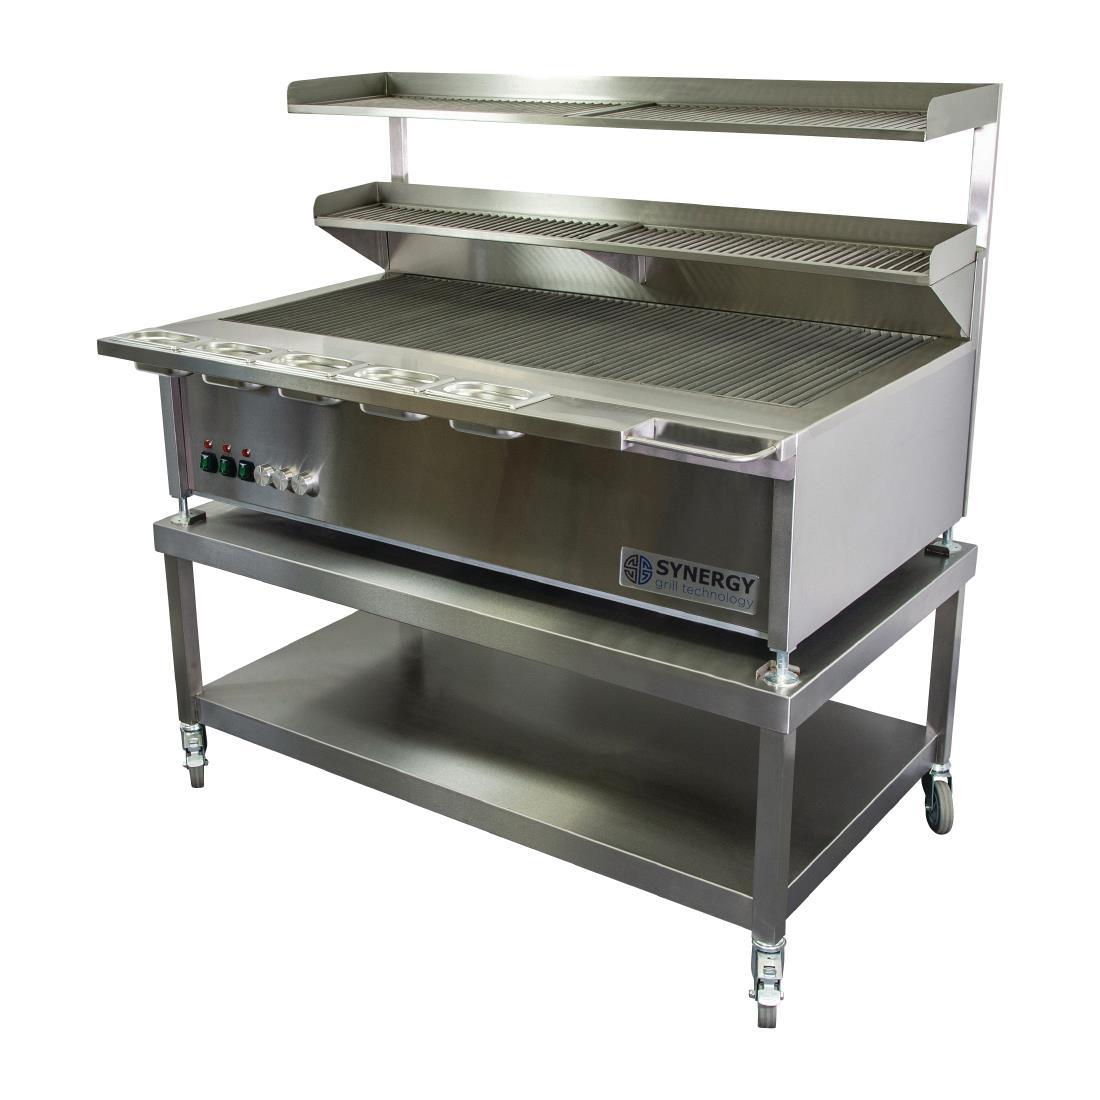 Synergy ST1300 Grill with Garnish Rail and Slow Cook Shelf - FD493  - 1